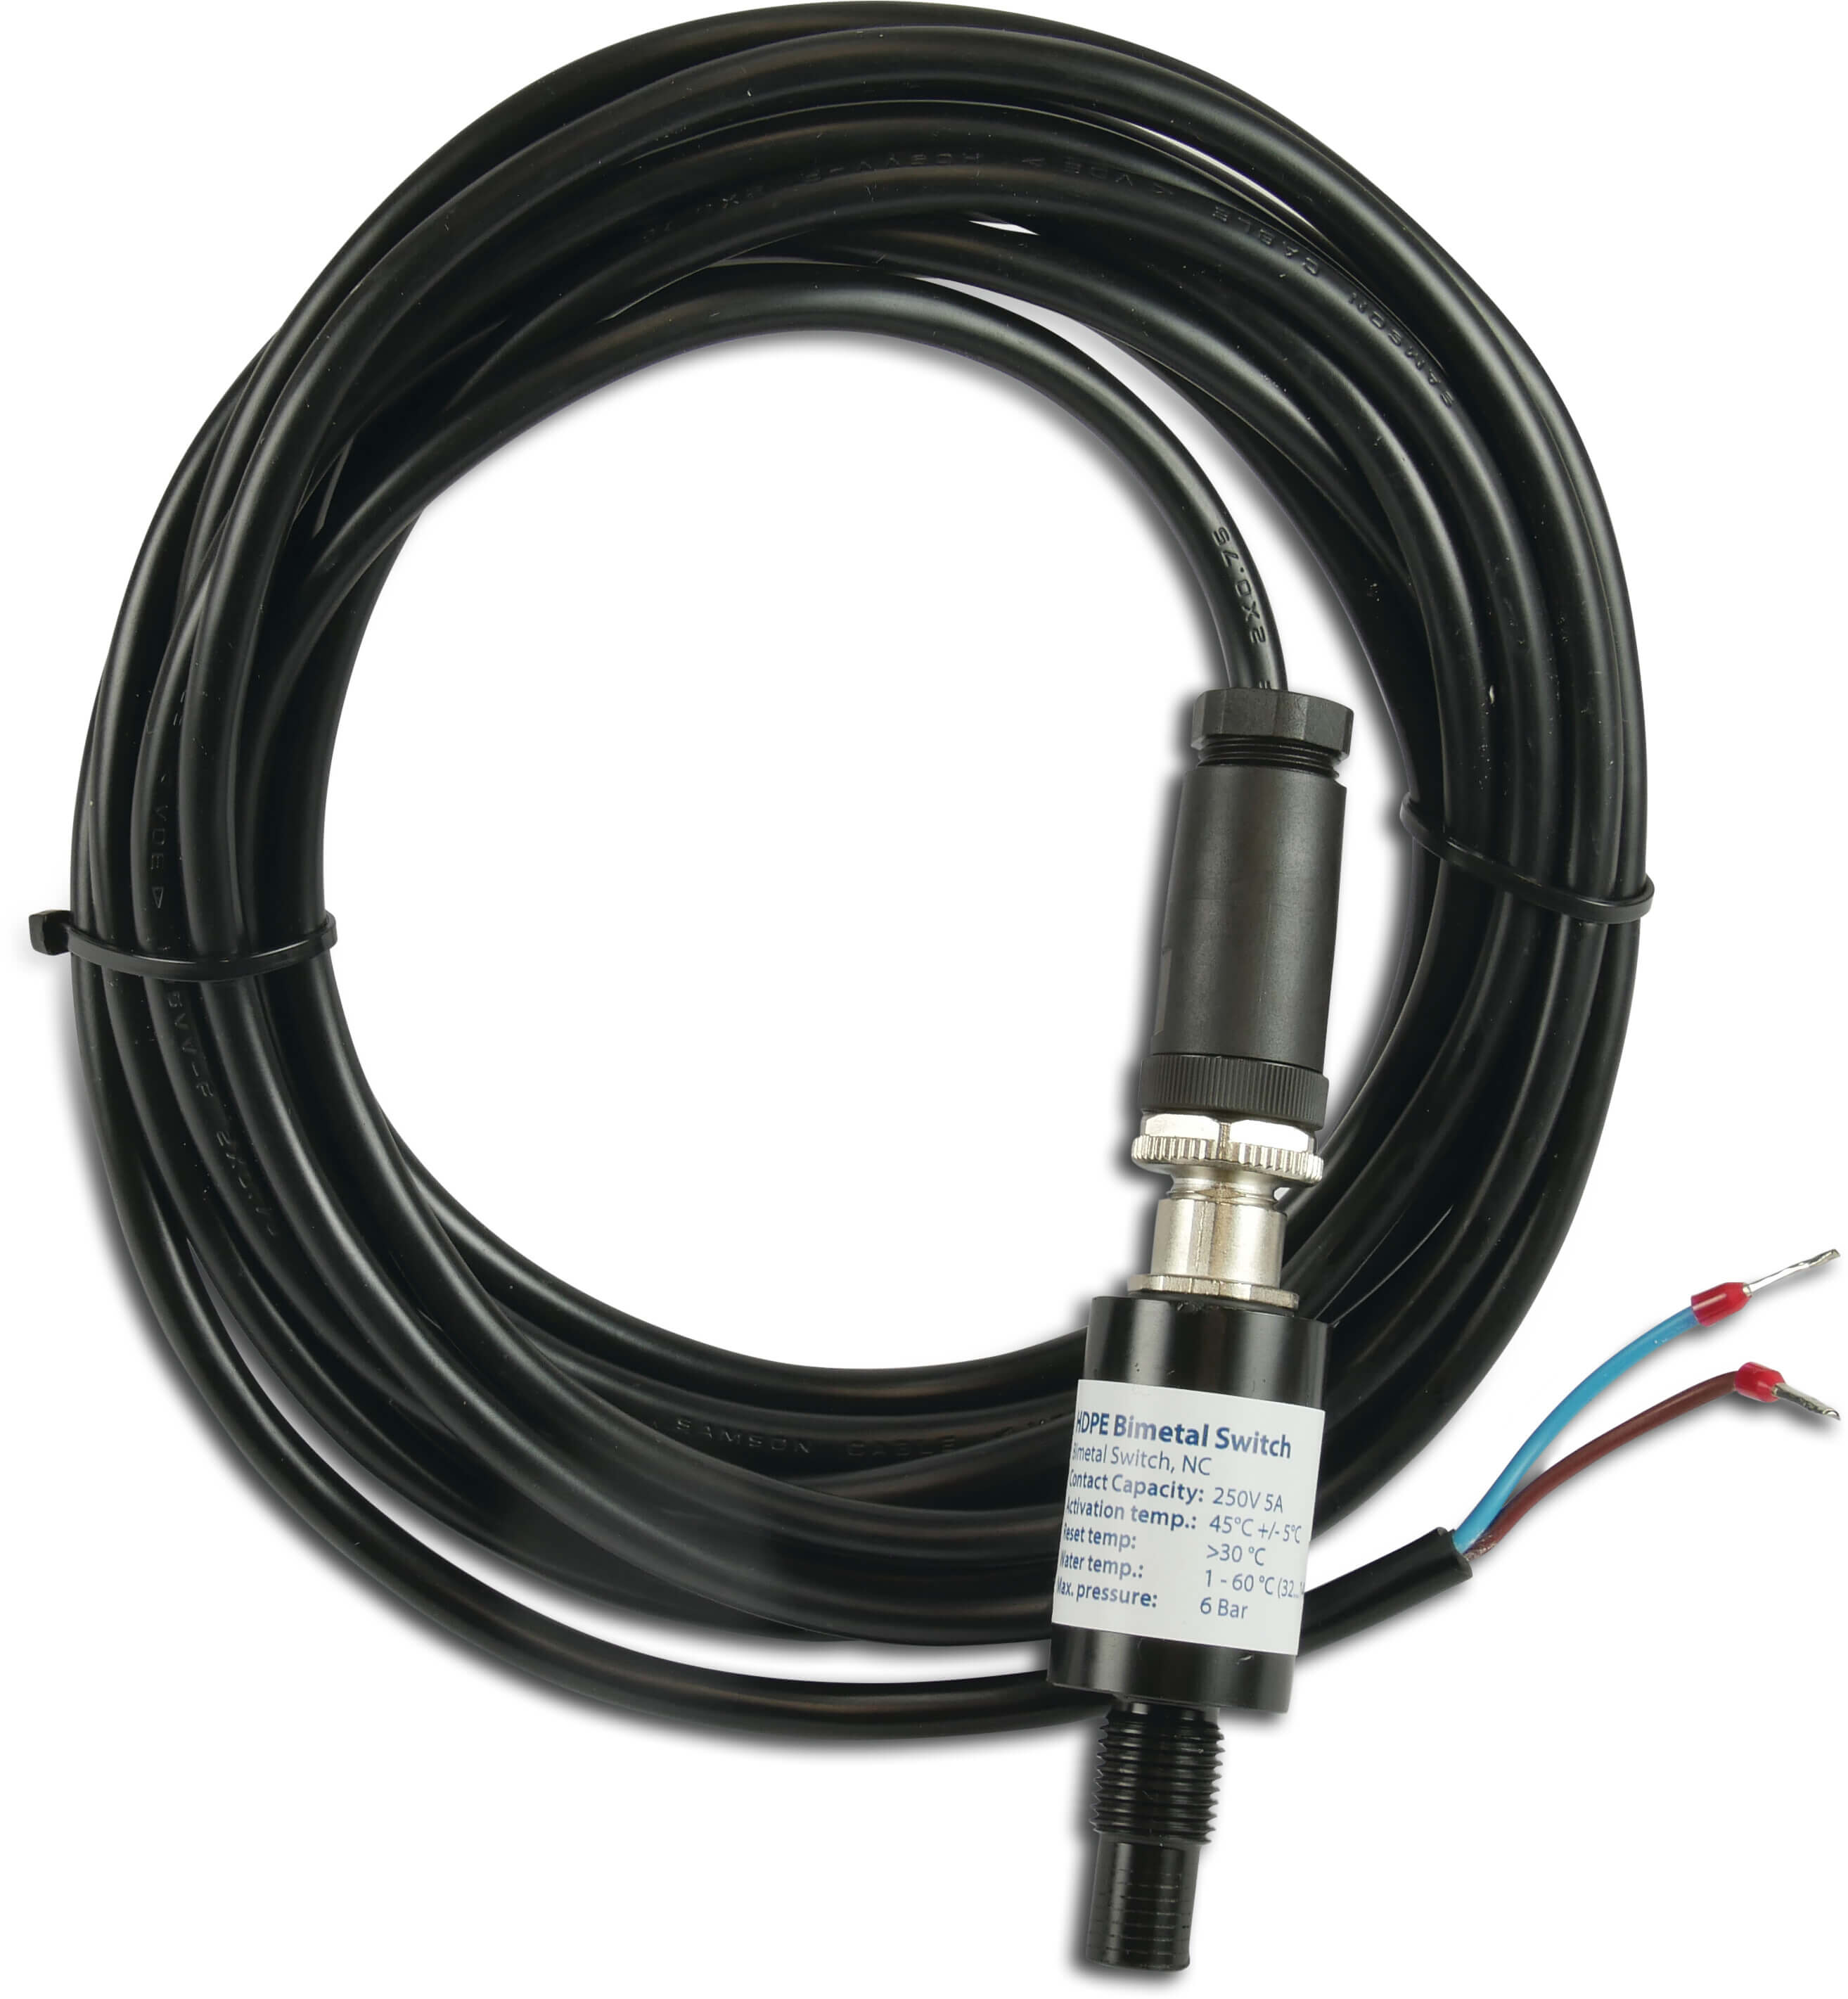 VGE Pro Temperature switch 5 meter cable